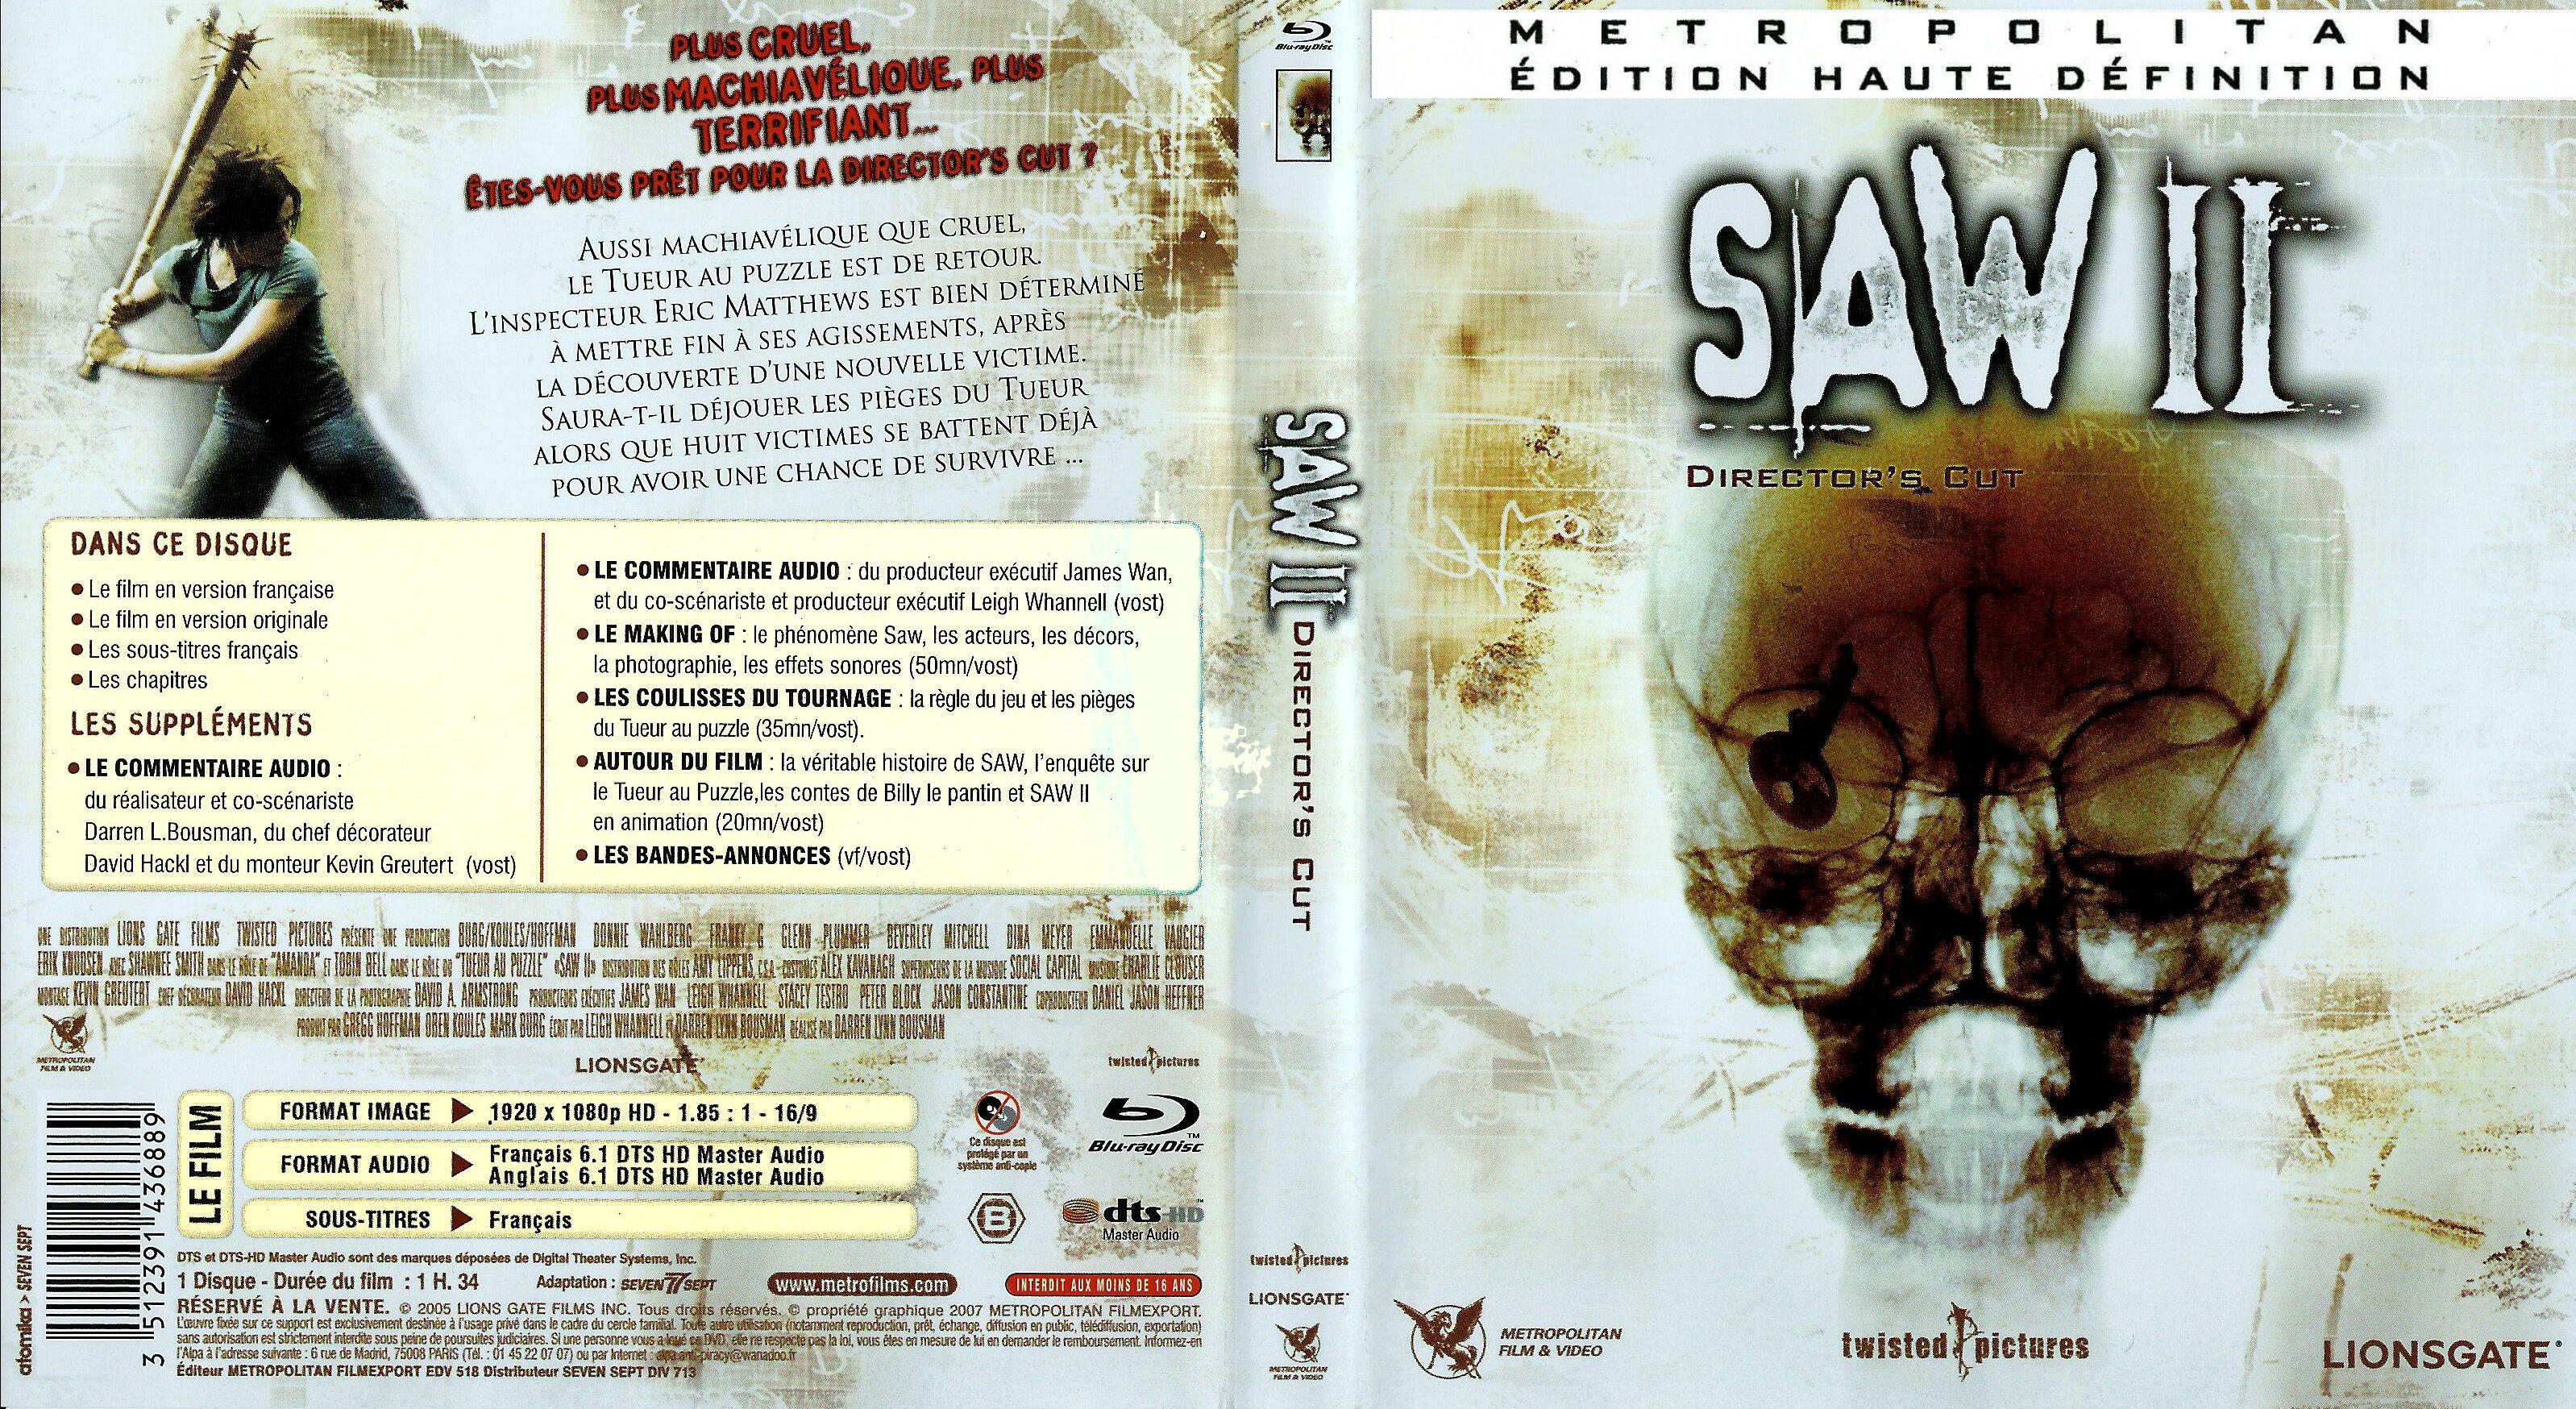 Jaquette DVD Saw 2 (BLU-RAY)